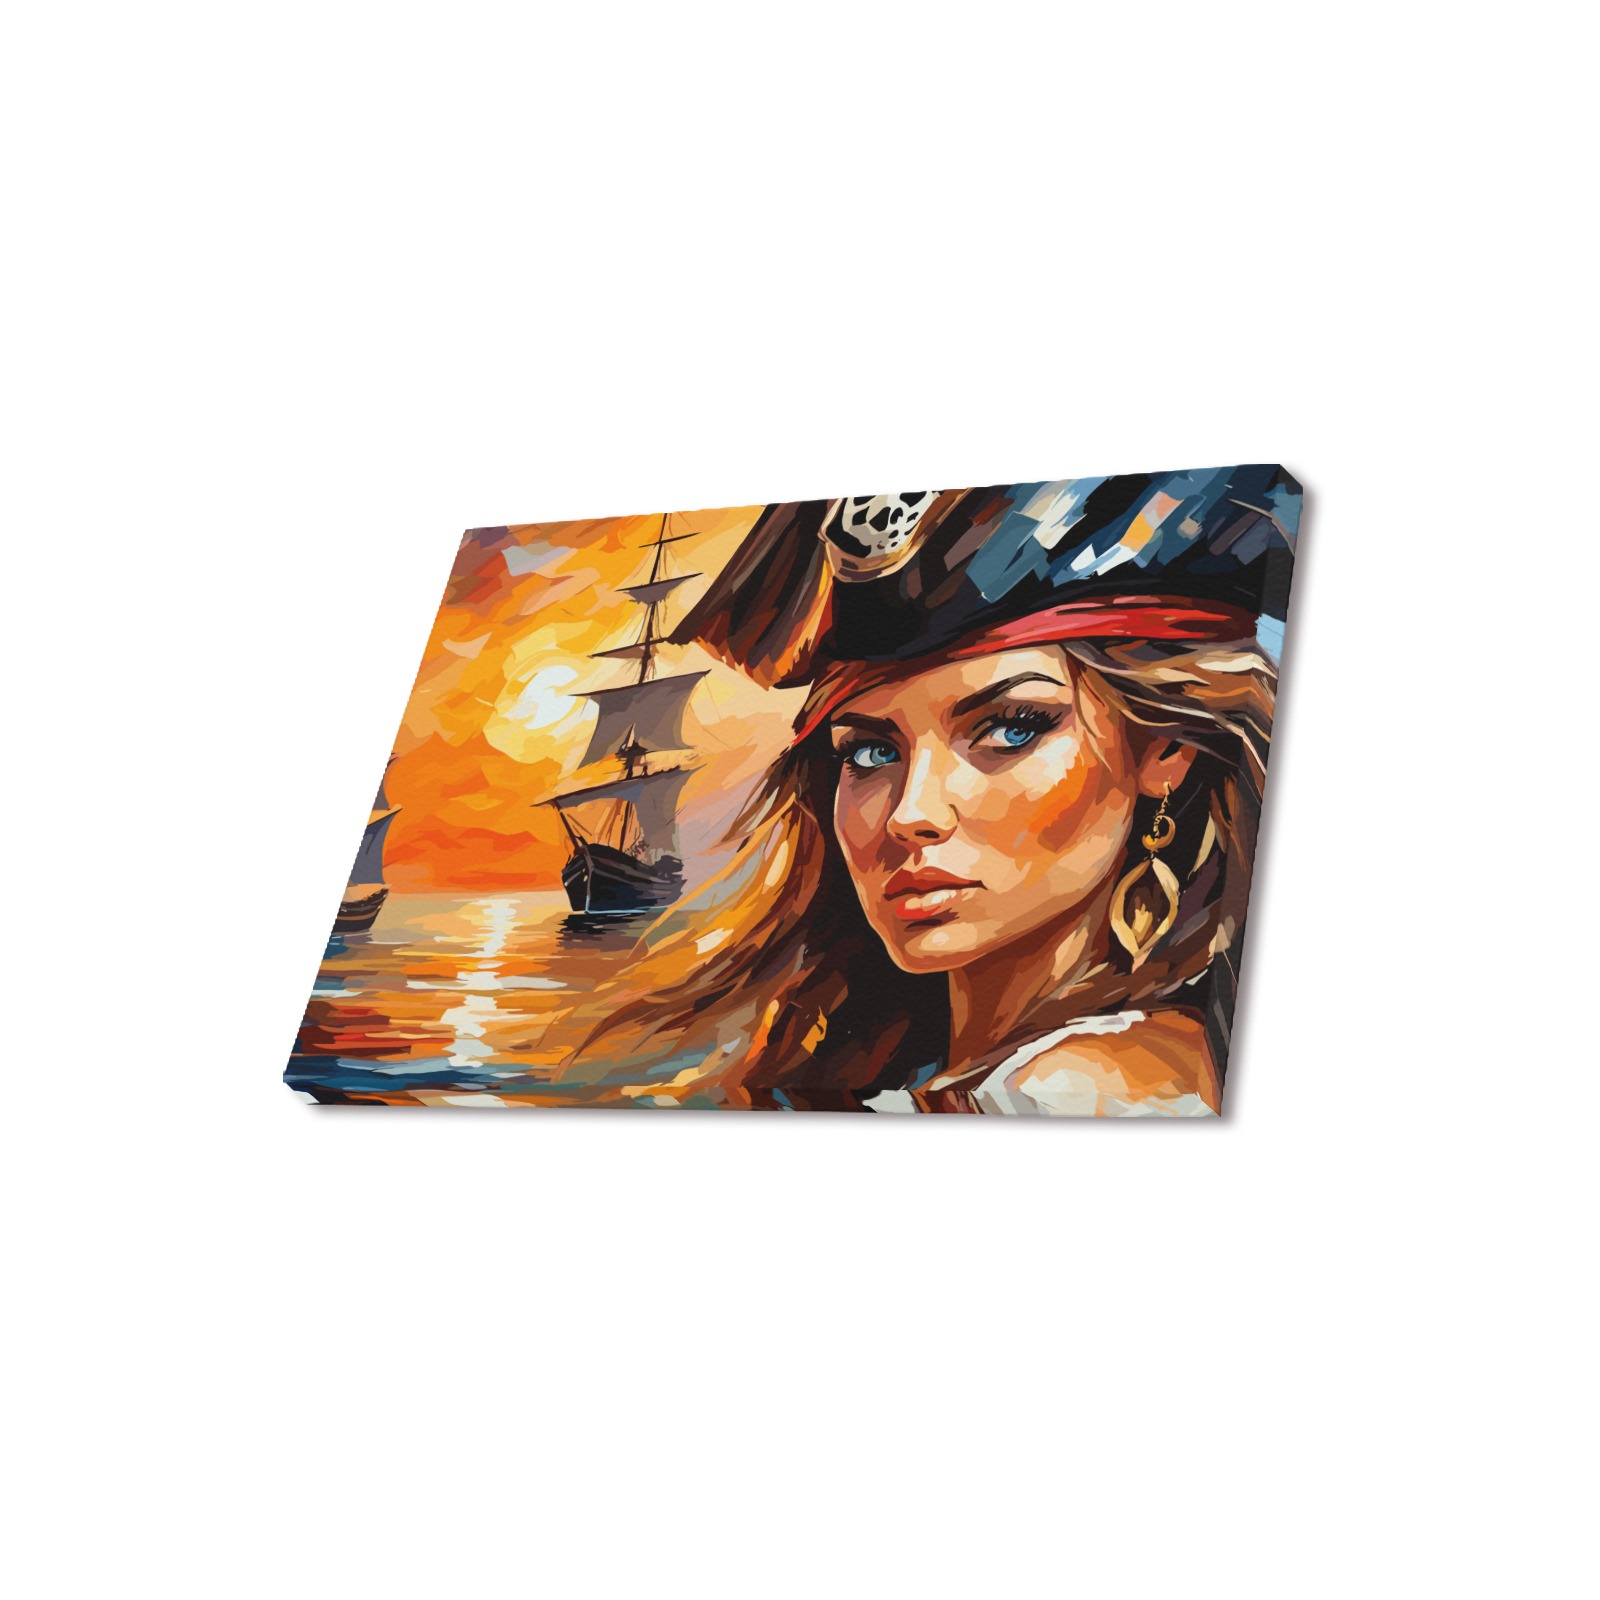 Adorable pirate girl and two tall ships at sunset. Upgraded Canvas Print 18"x12"